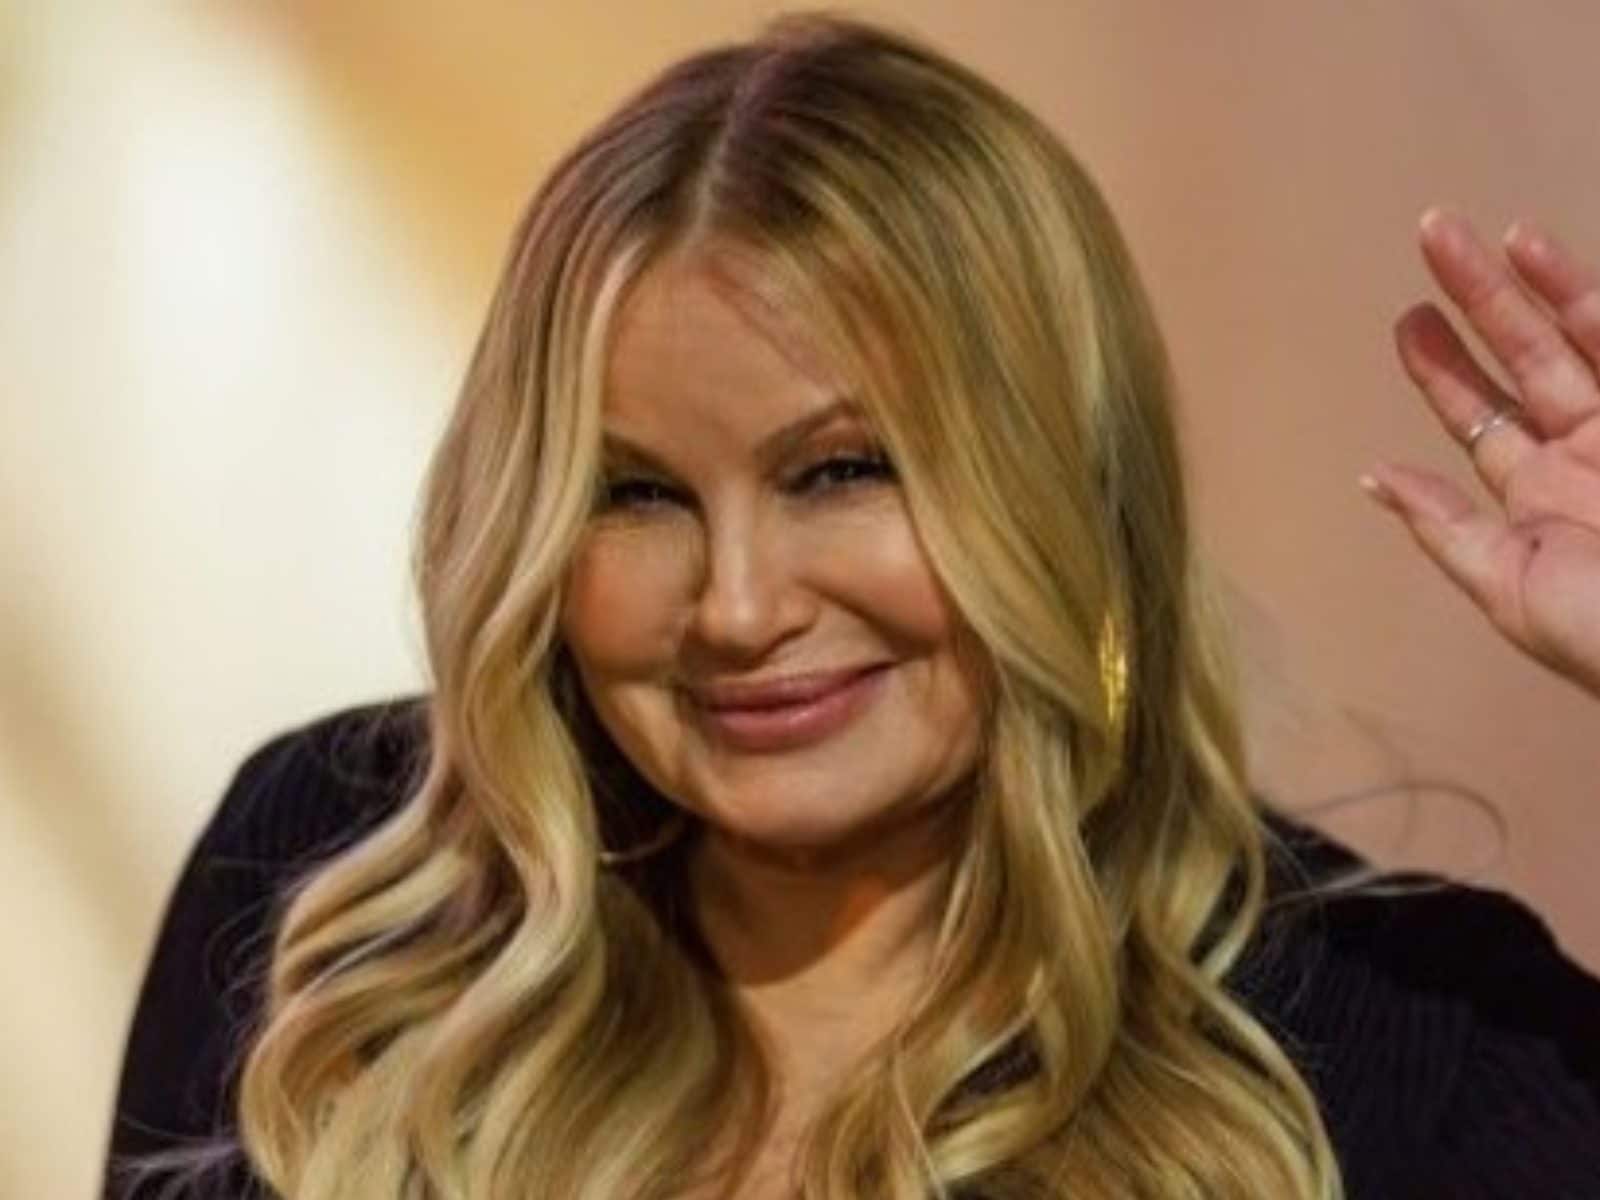 1600px x 1200px - Jennifer Coolidge Admits To Sleeping With 200 People After American Pie:  'Got Lots Of Sexual Action'